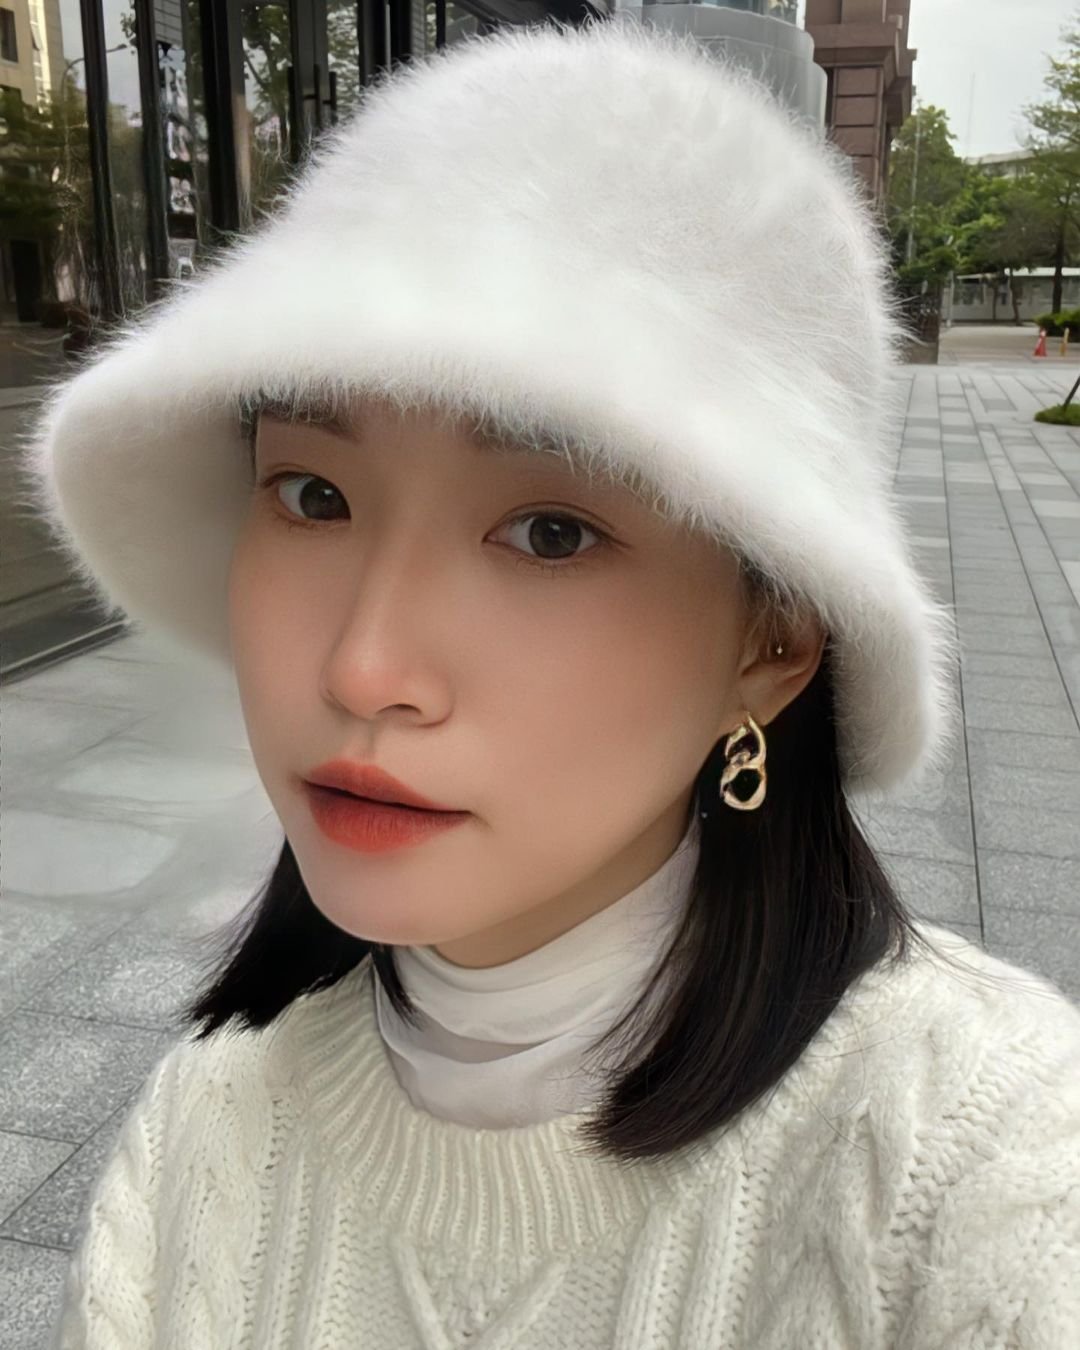 My name is Susan and I am 31 years old. Nice to meet you. I am from Taiwan and now I am in Seoul    https://t.co/UTsL1B0BPa